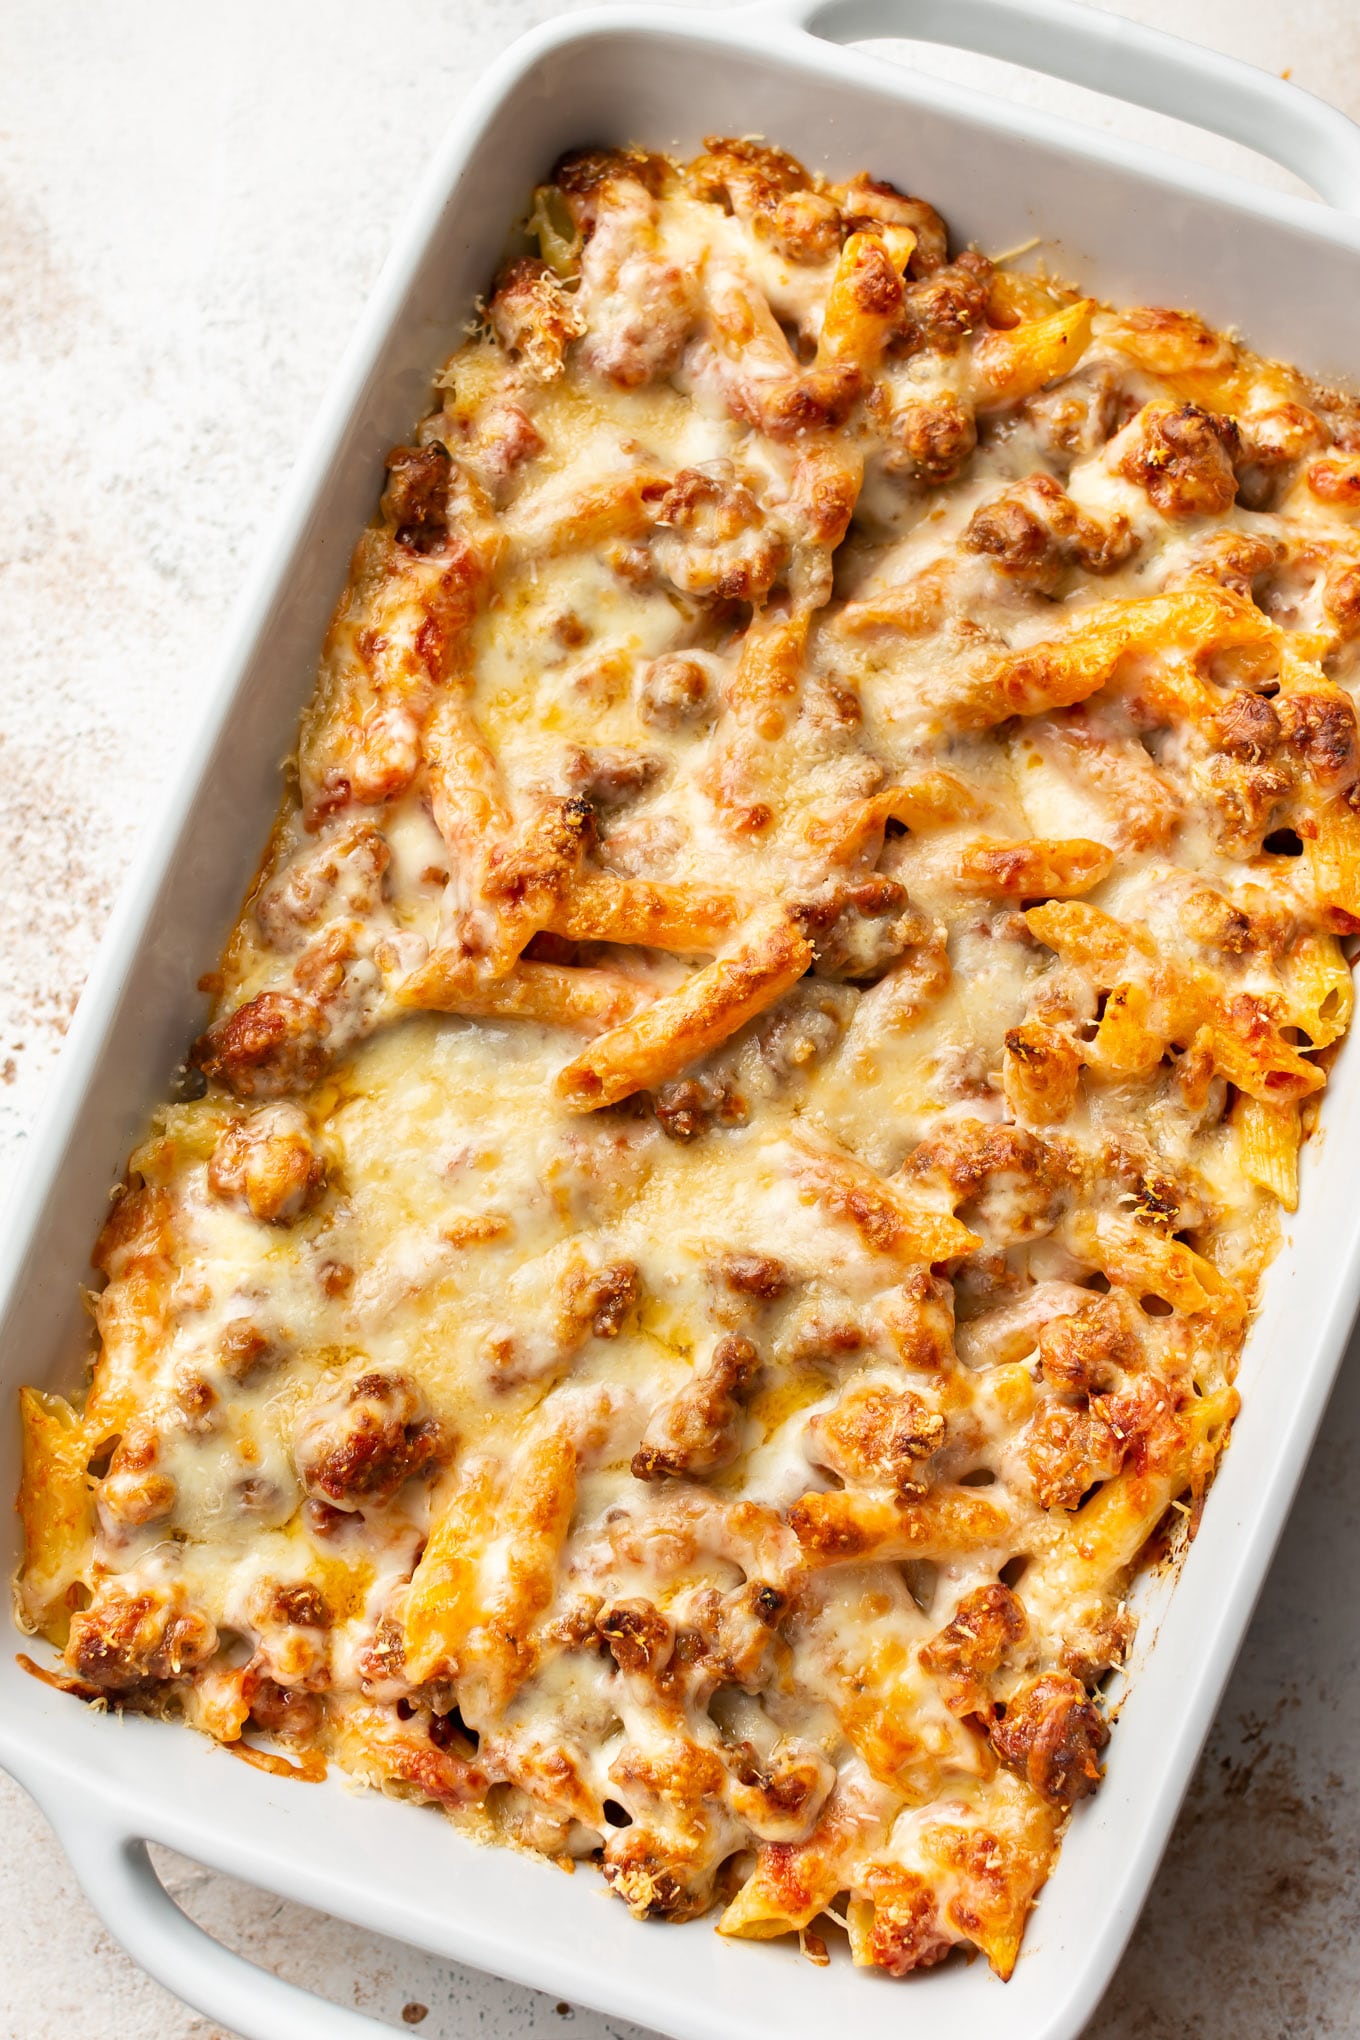 40 Comforting Pasta Casseroles To Make In Your 9x13